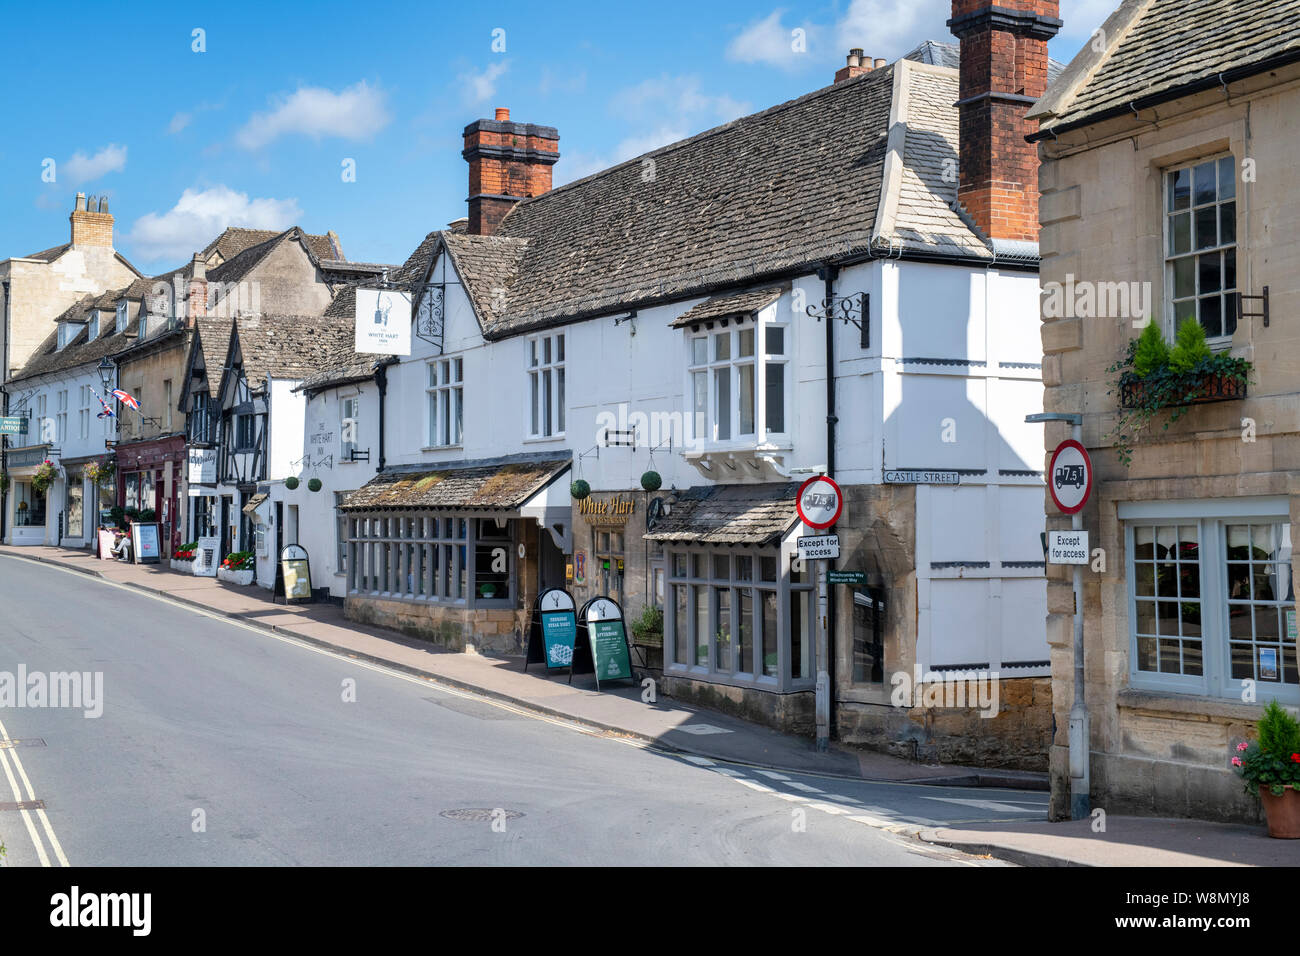 White hart pub and shops along hailes street in the ancient Anglo Saxon town of Winchcombe, Cotswolds, Gloucestershire, England Stock Photo